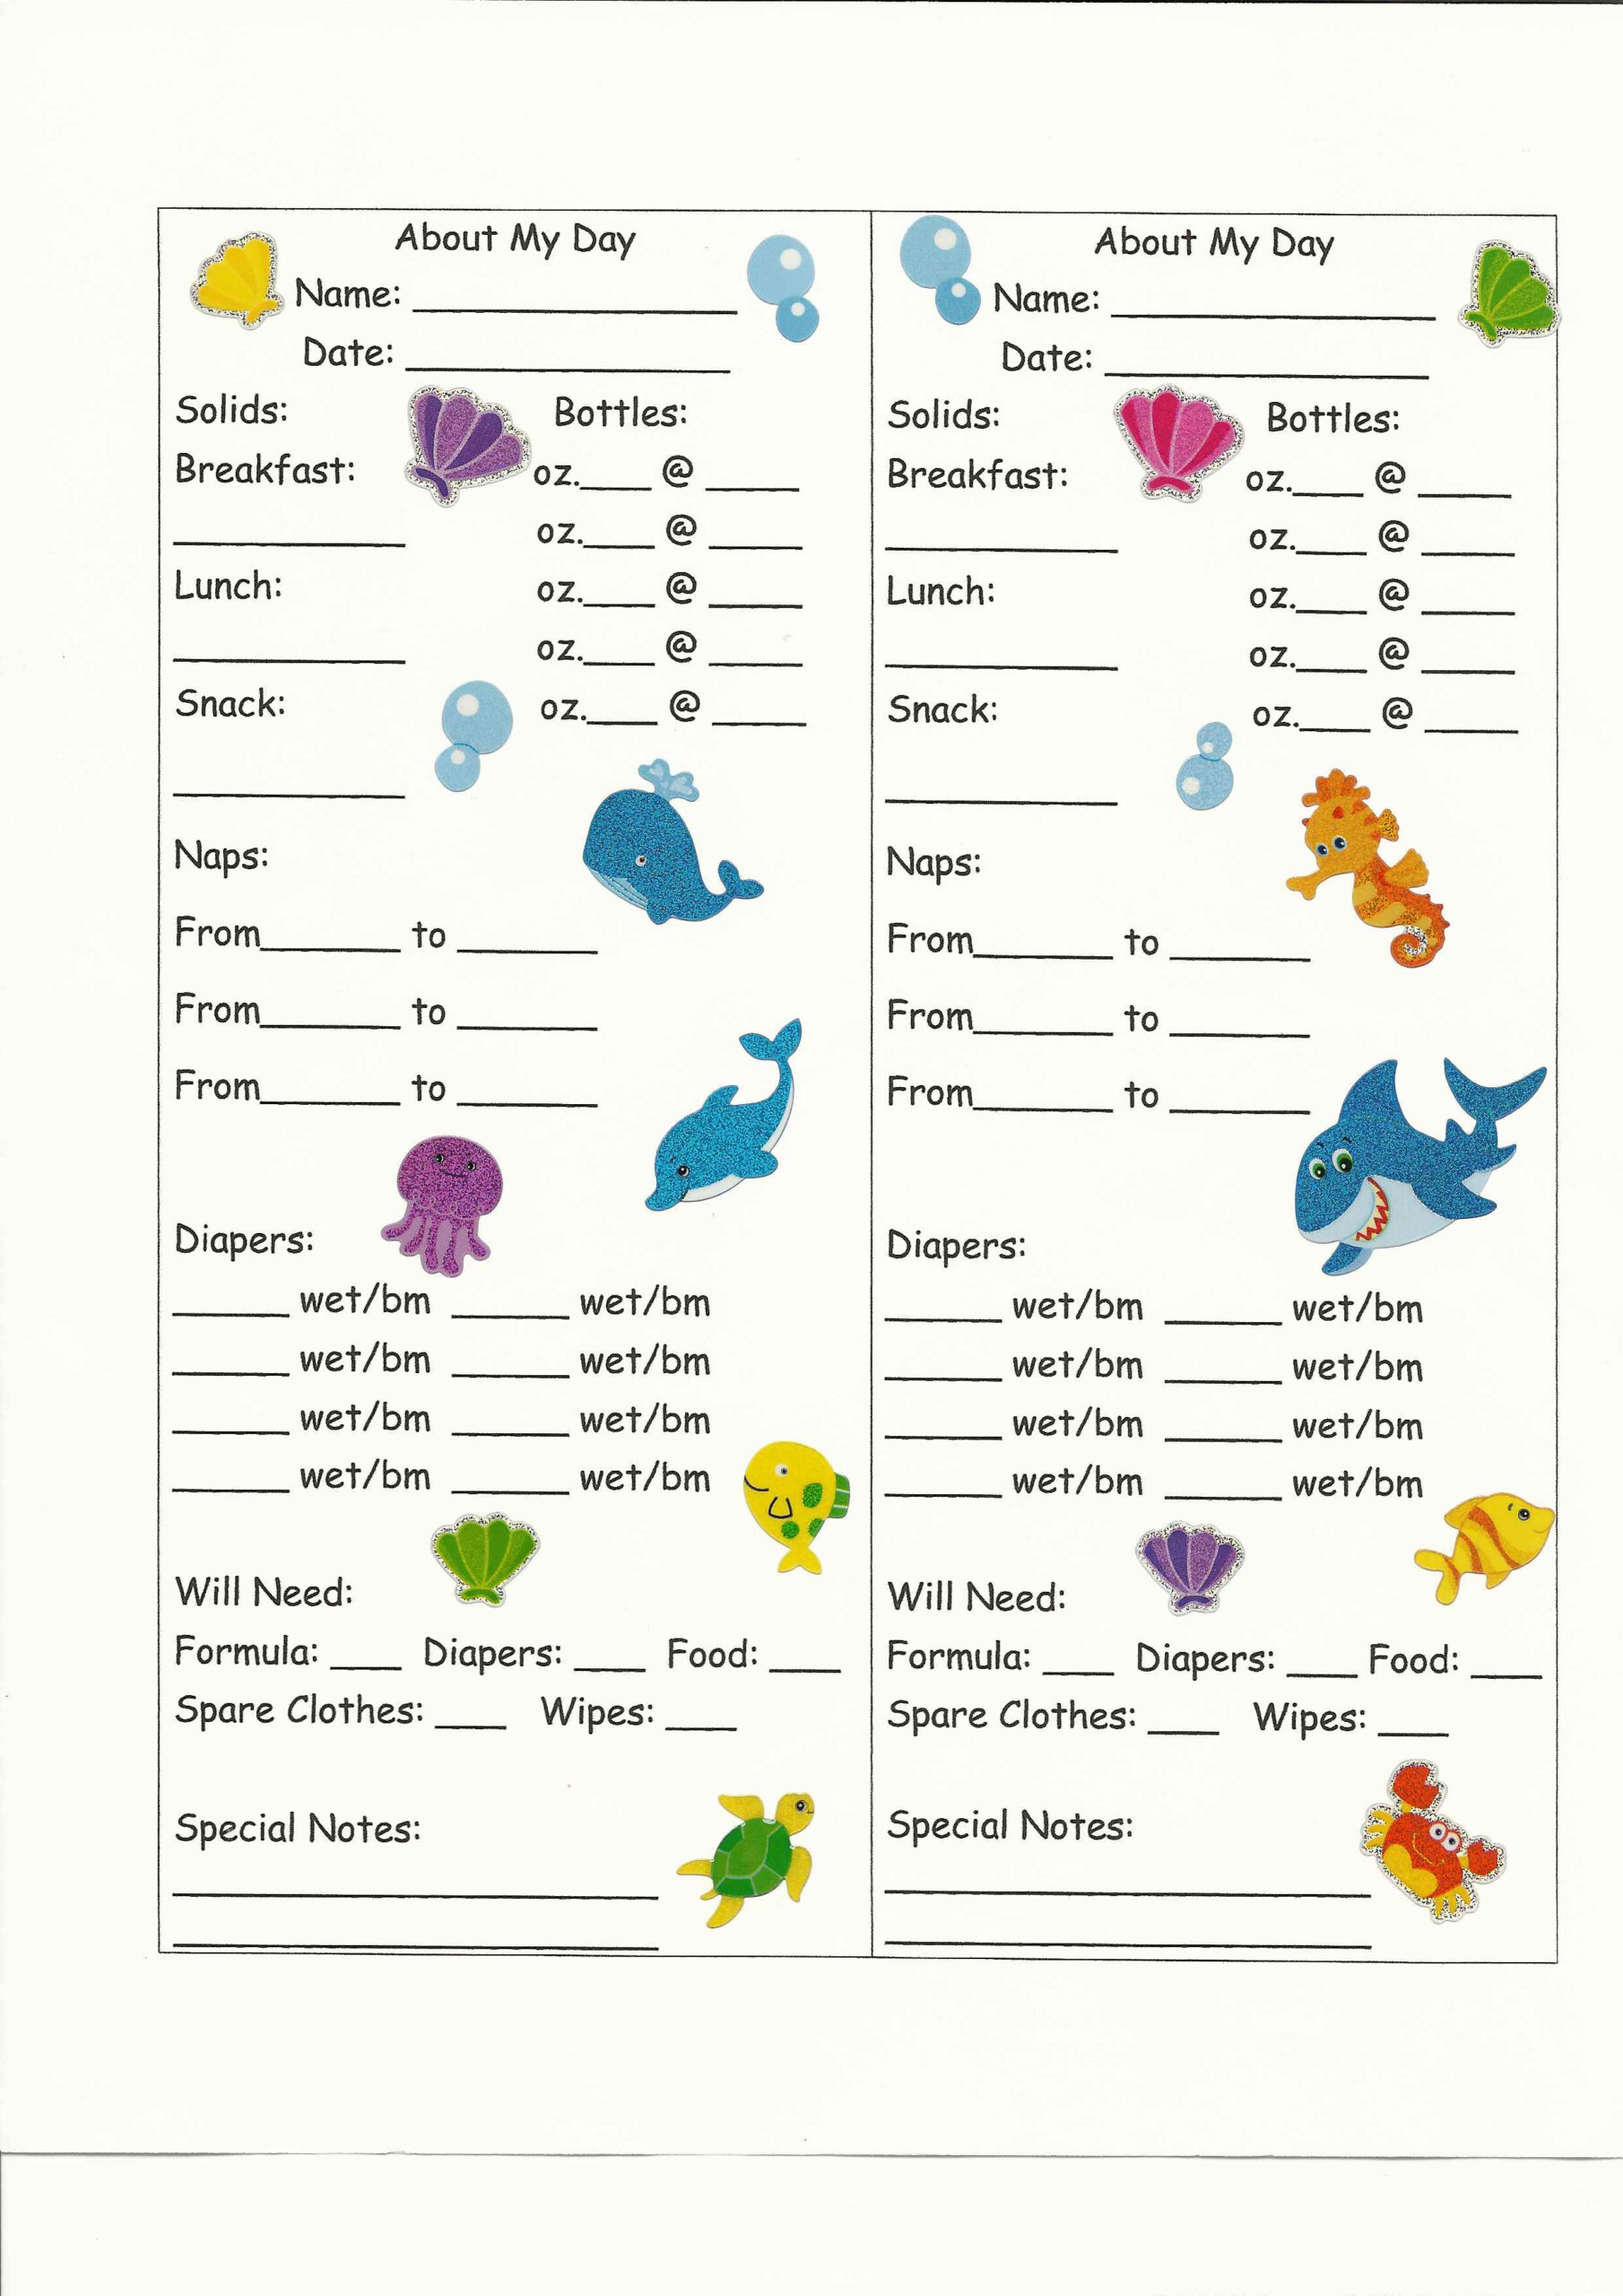 Free Printable Daily Sheets For Daycare  Child Care intended for Daycare Daily Report Sheets